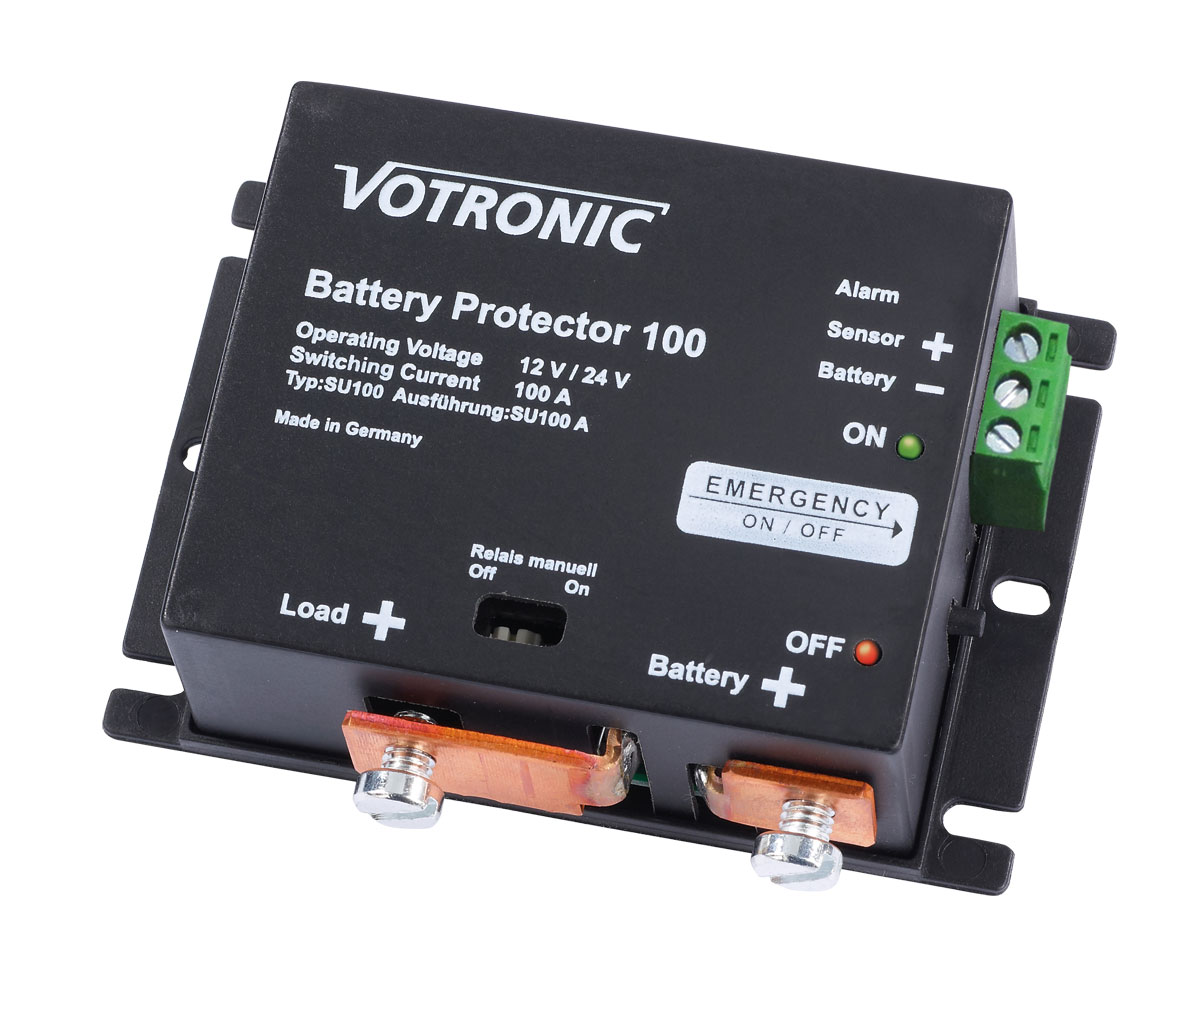 Votronic Battery Protector 100